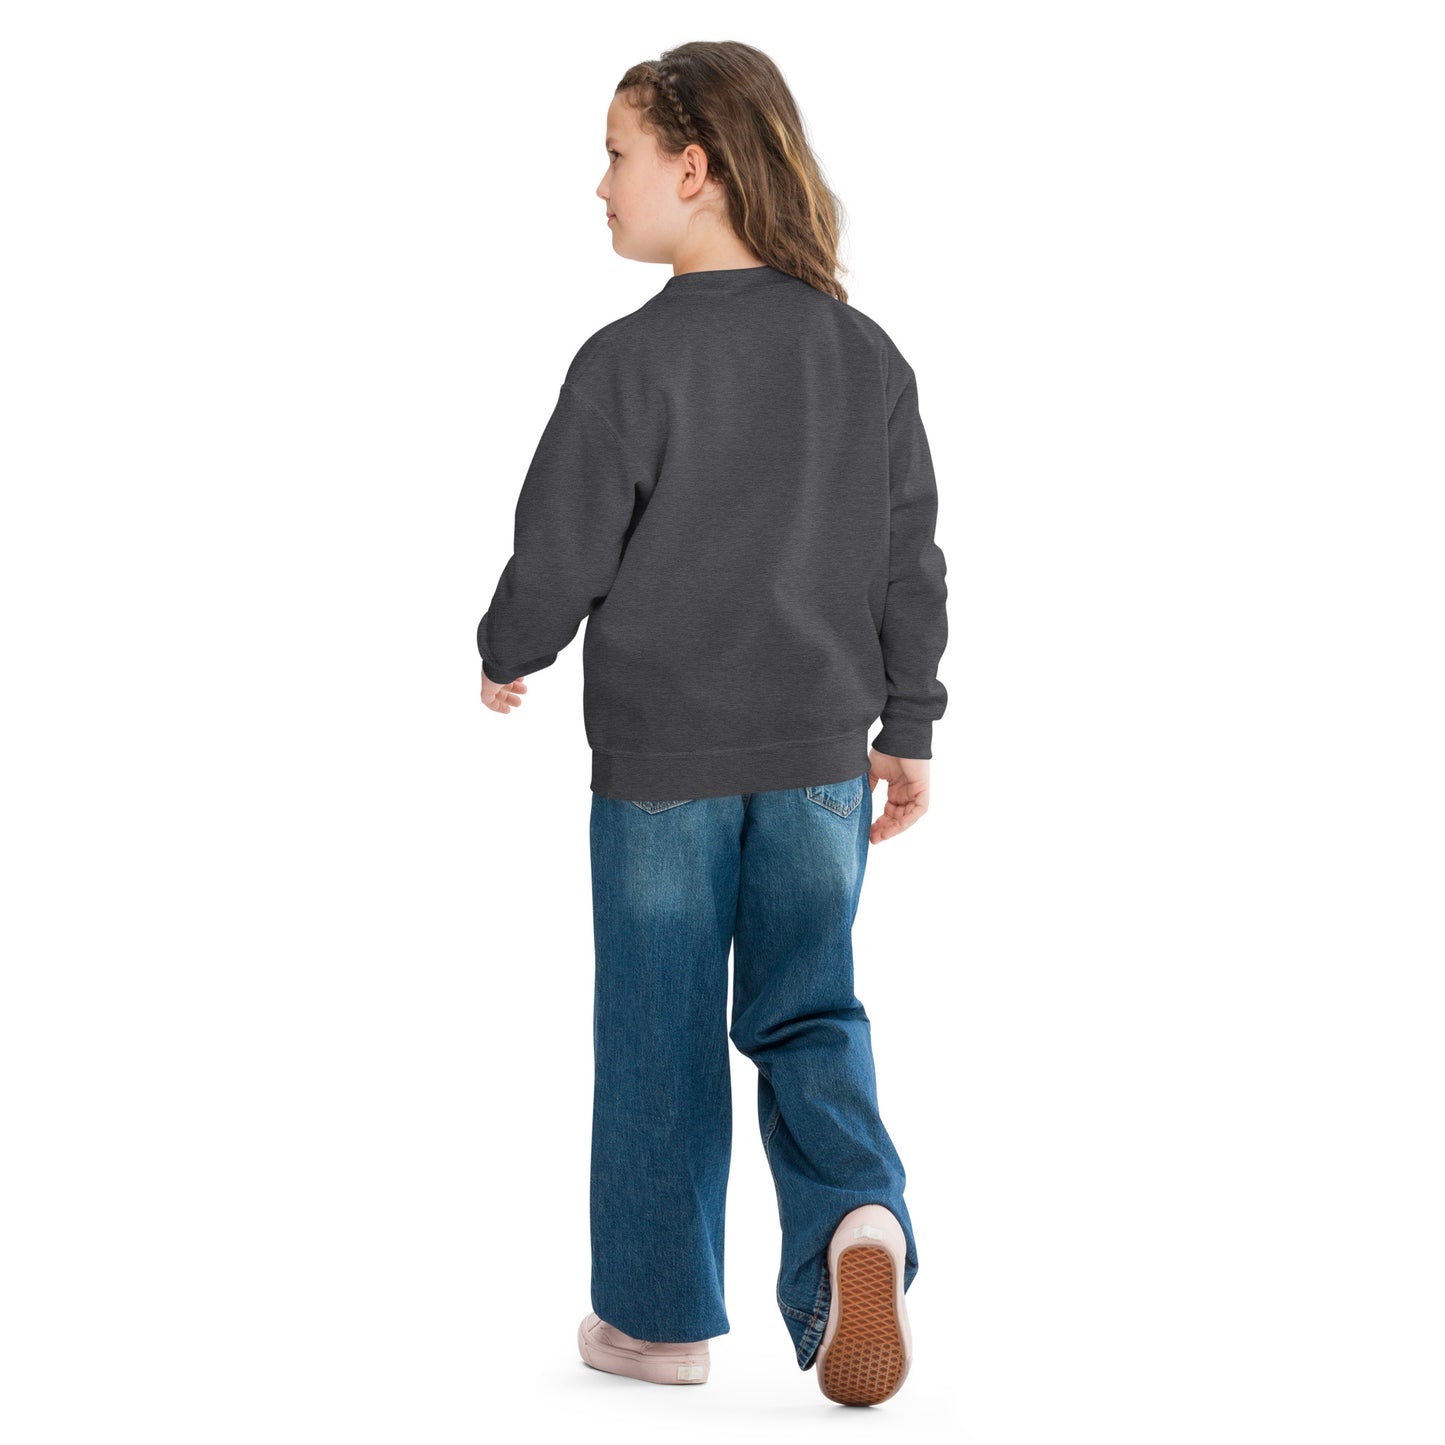 a little girl wearing a sweatshirt and jeans